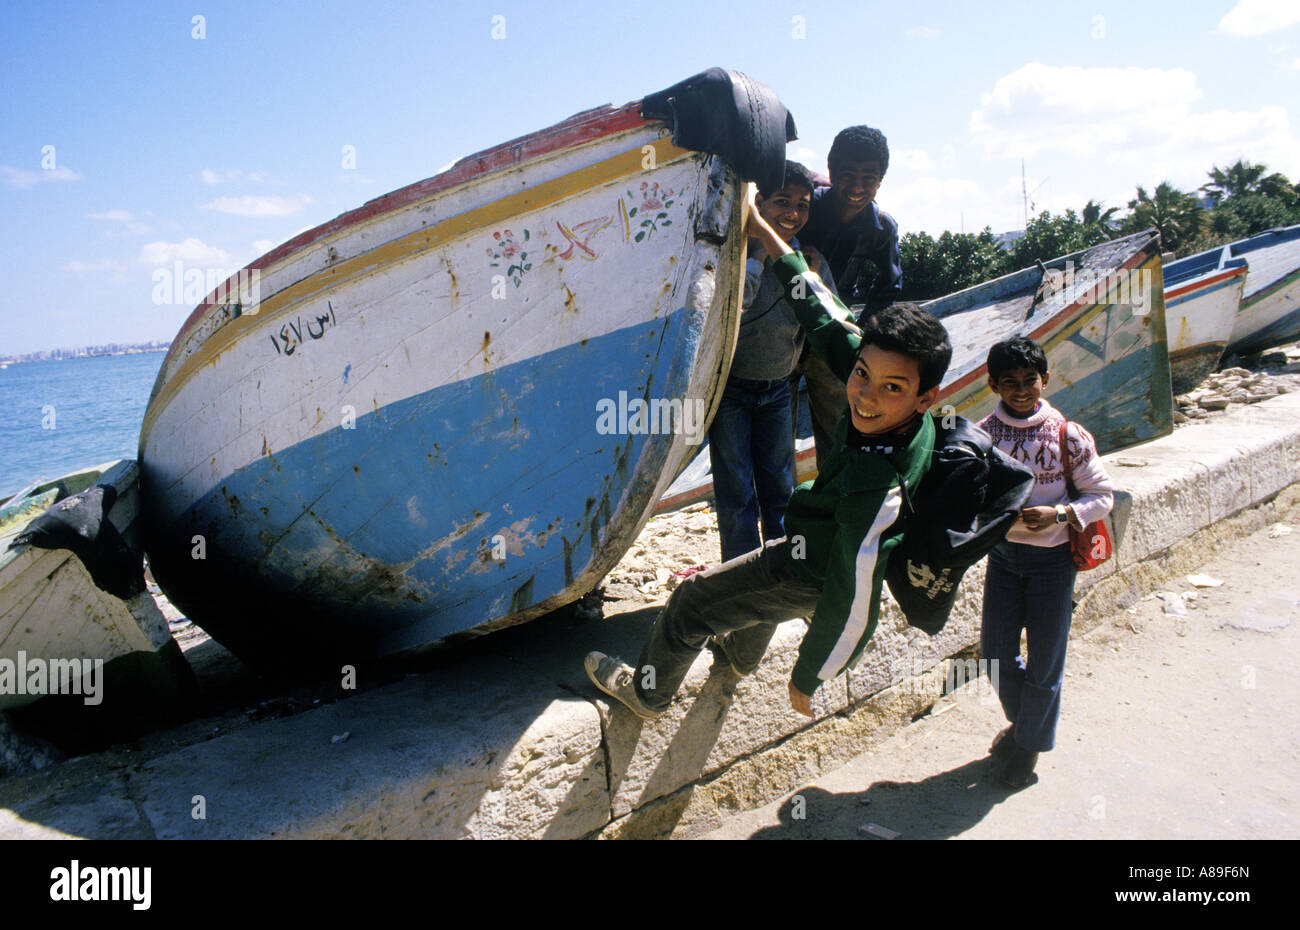 Egypt children playing with a fishing boat , Alexandria, Egypt Stock Photo